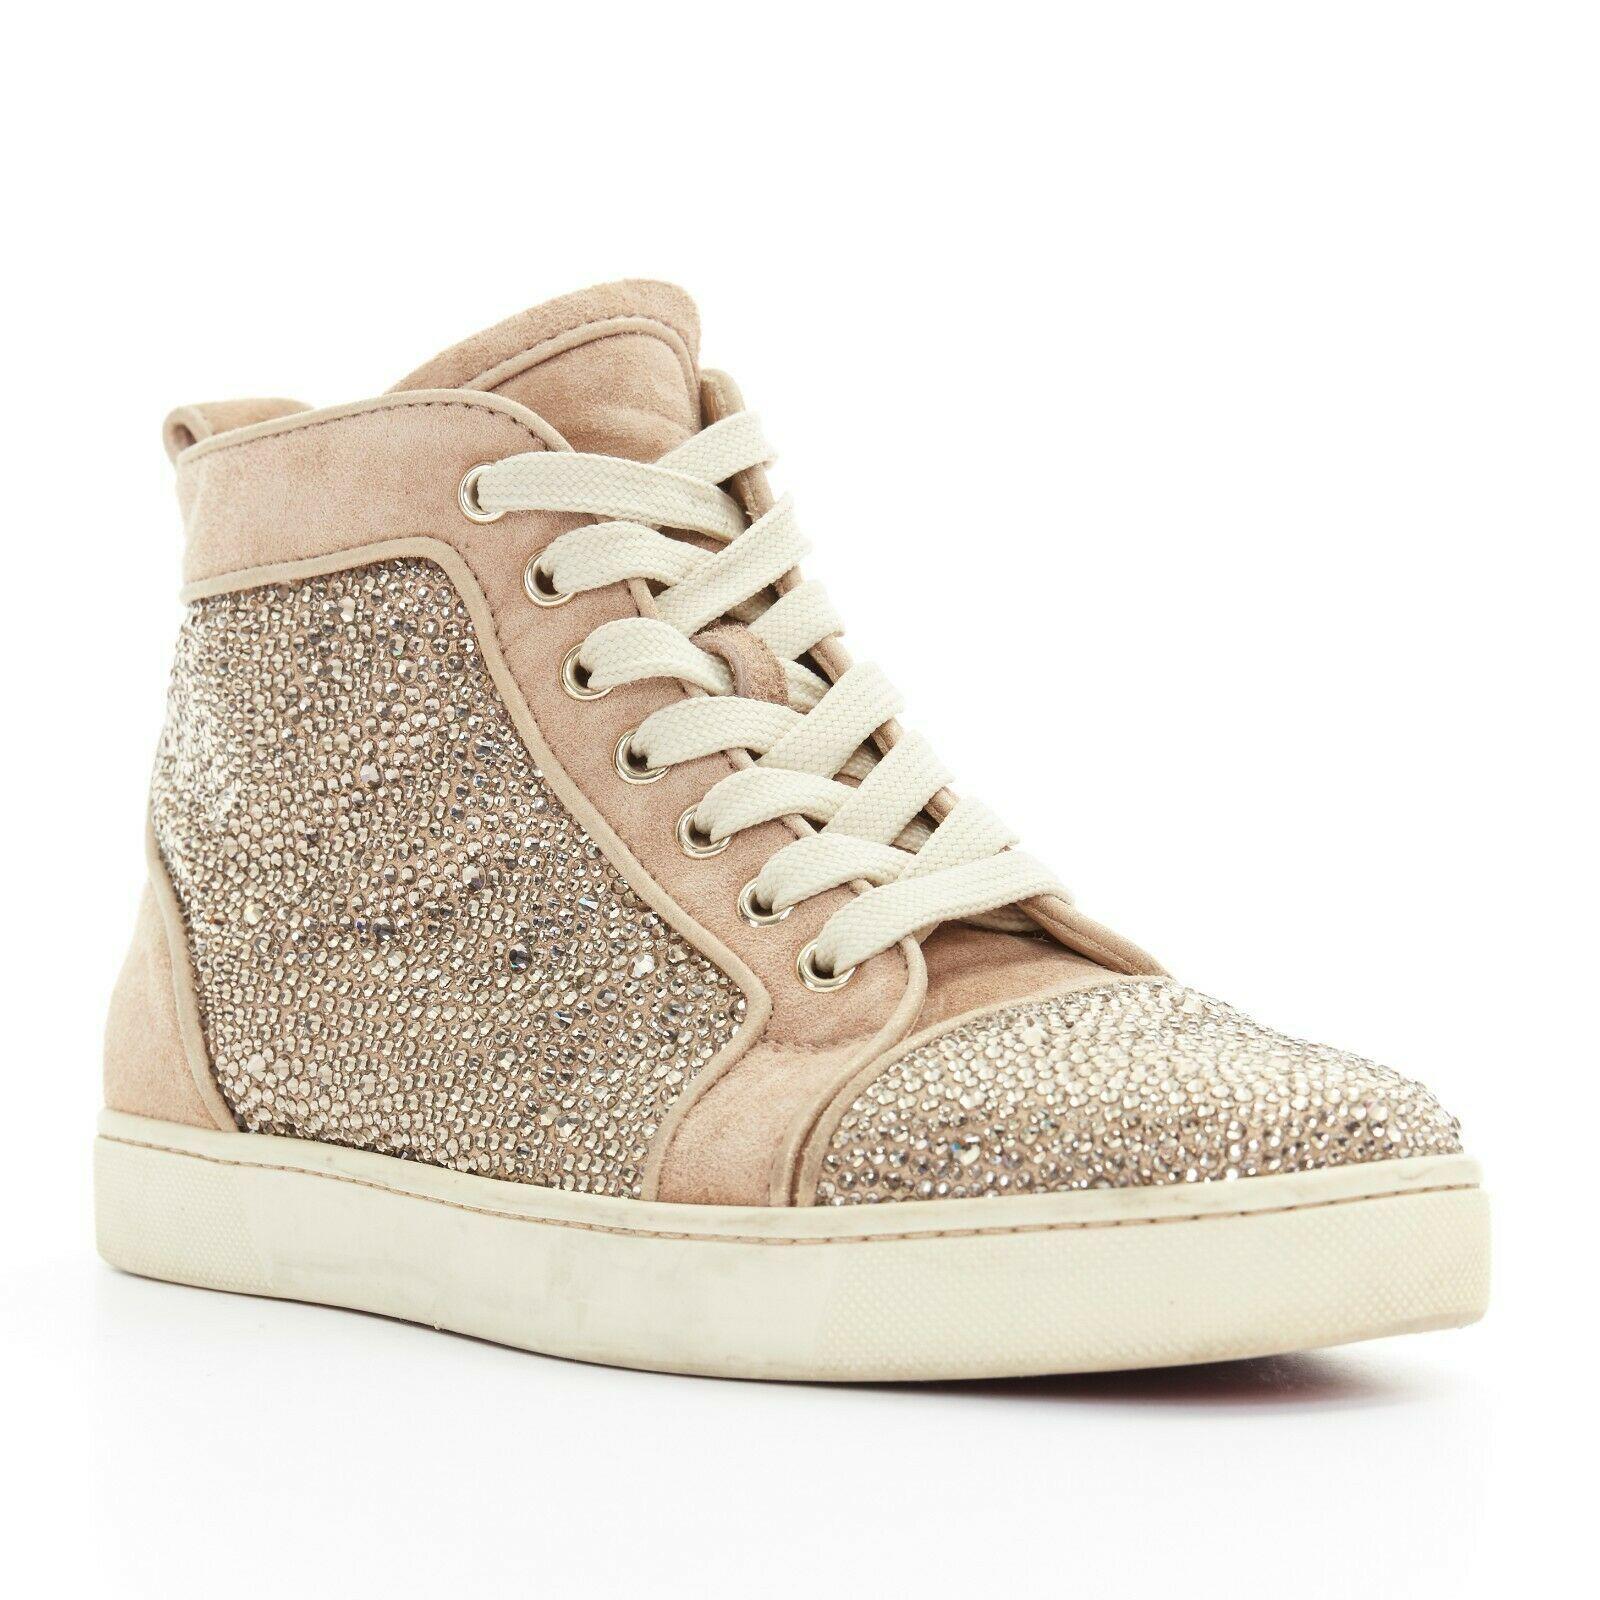 CHRISTIAN LOUBOUTIN Louis dusty rose strass crystal high top sneakers EU38.5
CHRISTIAN LOUBOUTIN
Louis Flat Strass sneakers. Dusty pink suede leather upper. Swavovski crystal strass embellishment on side and at toe. Lace up front. Leather trimming